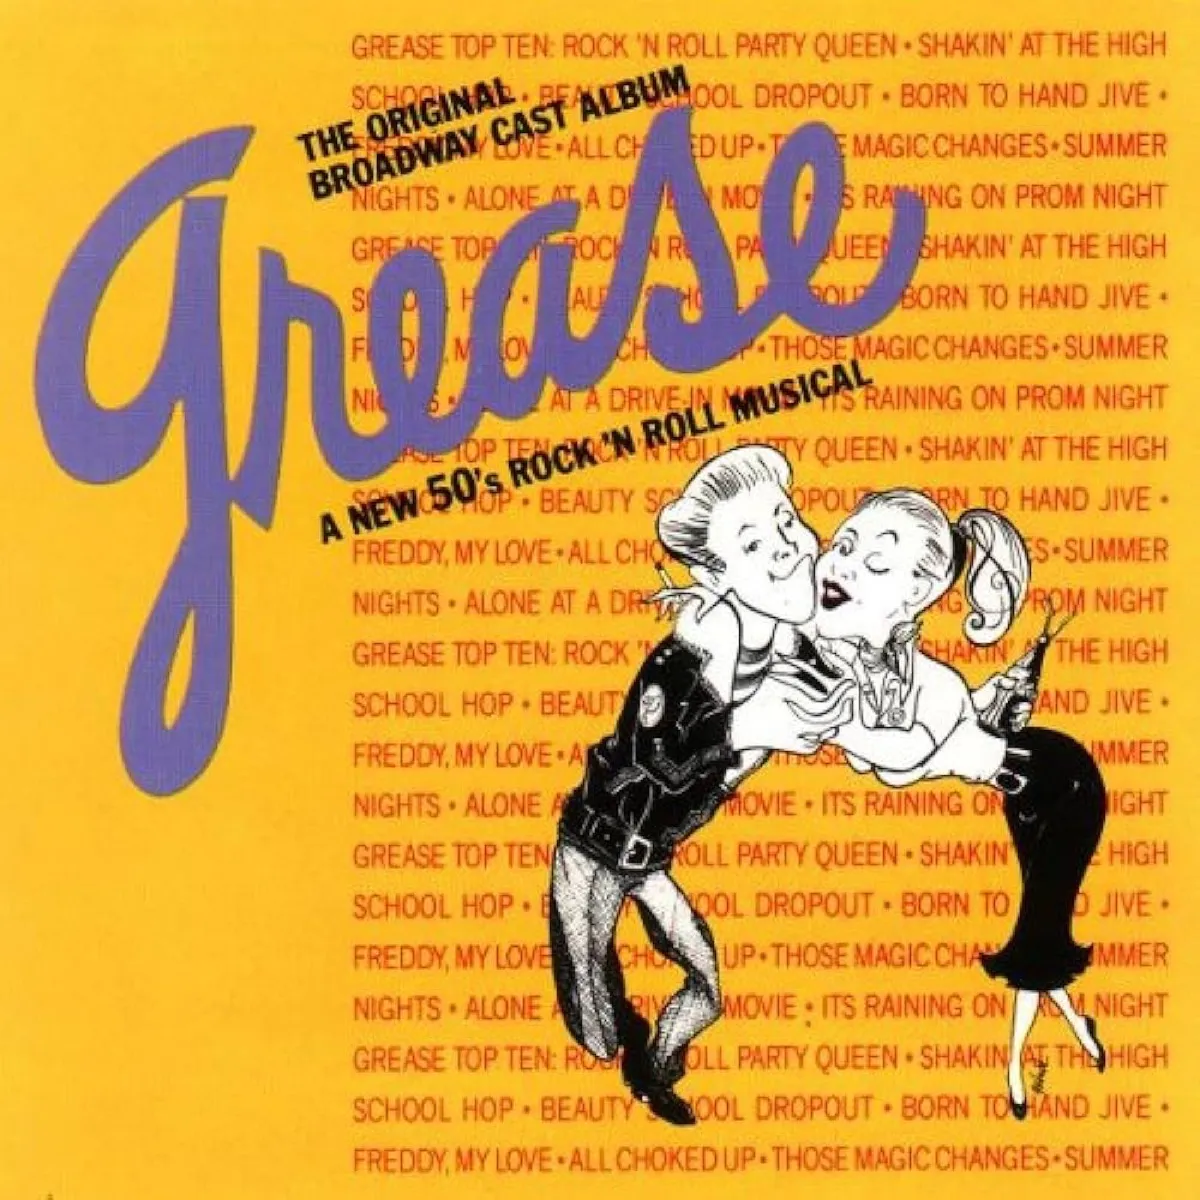 Grease cast recording